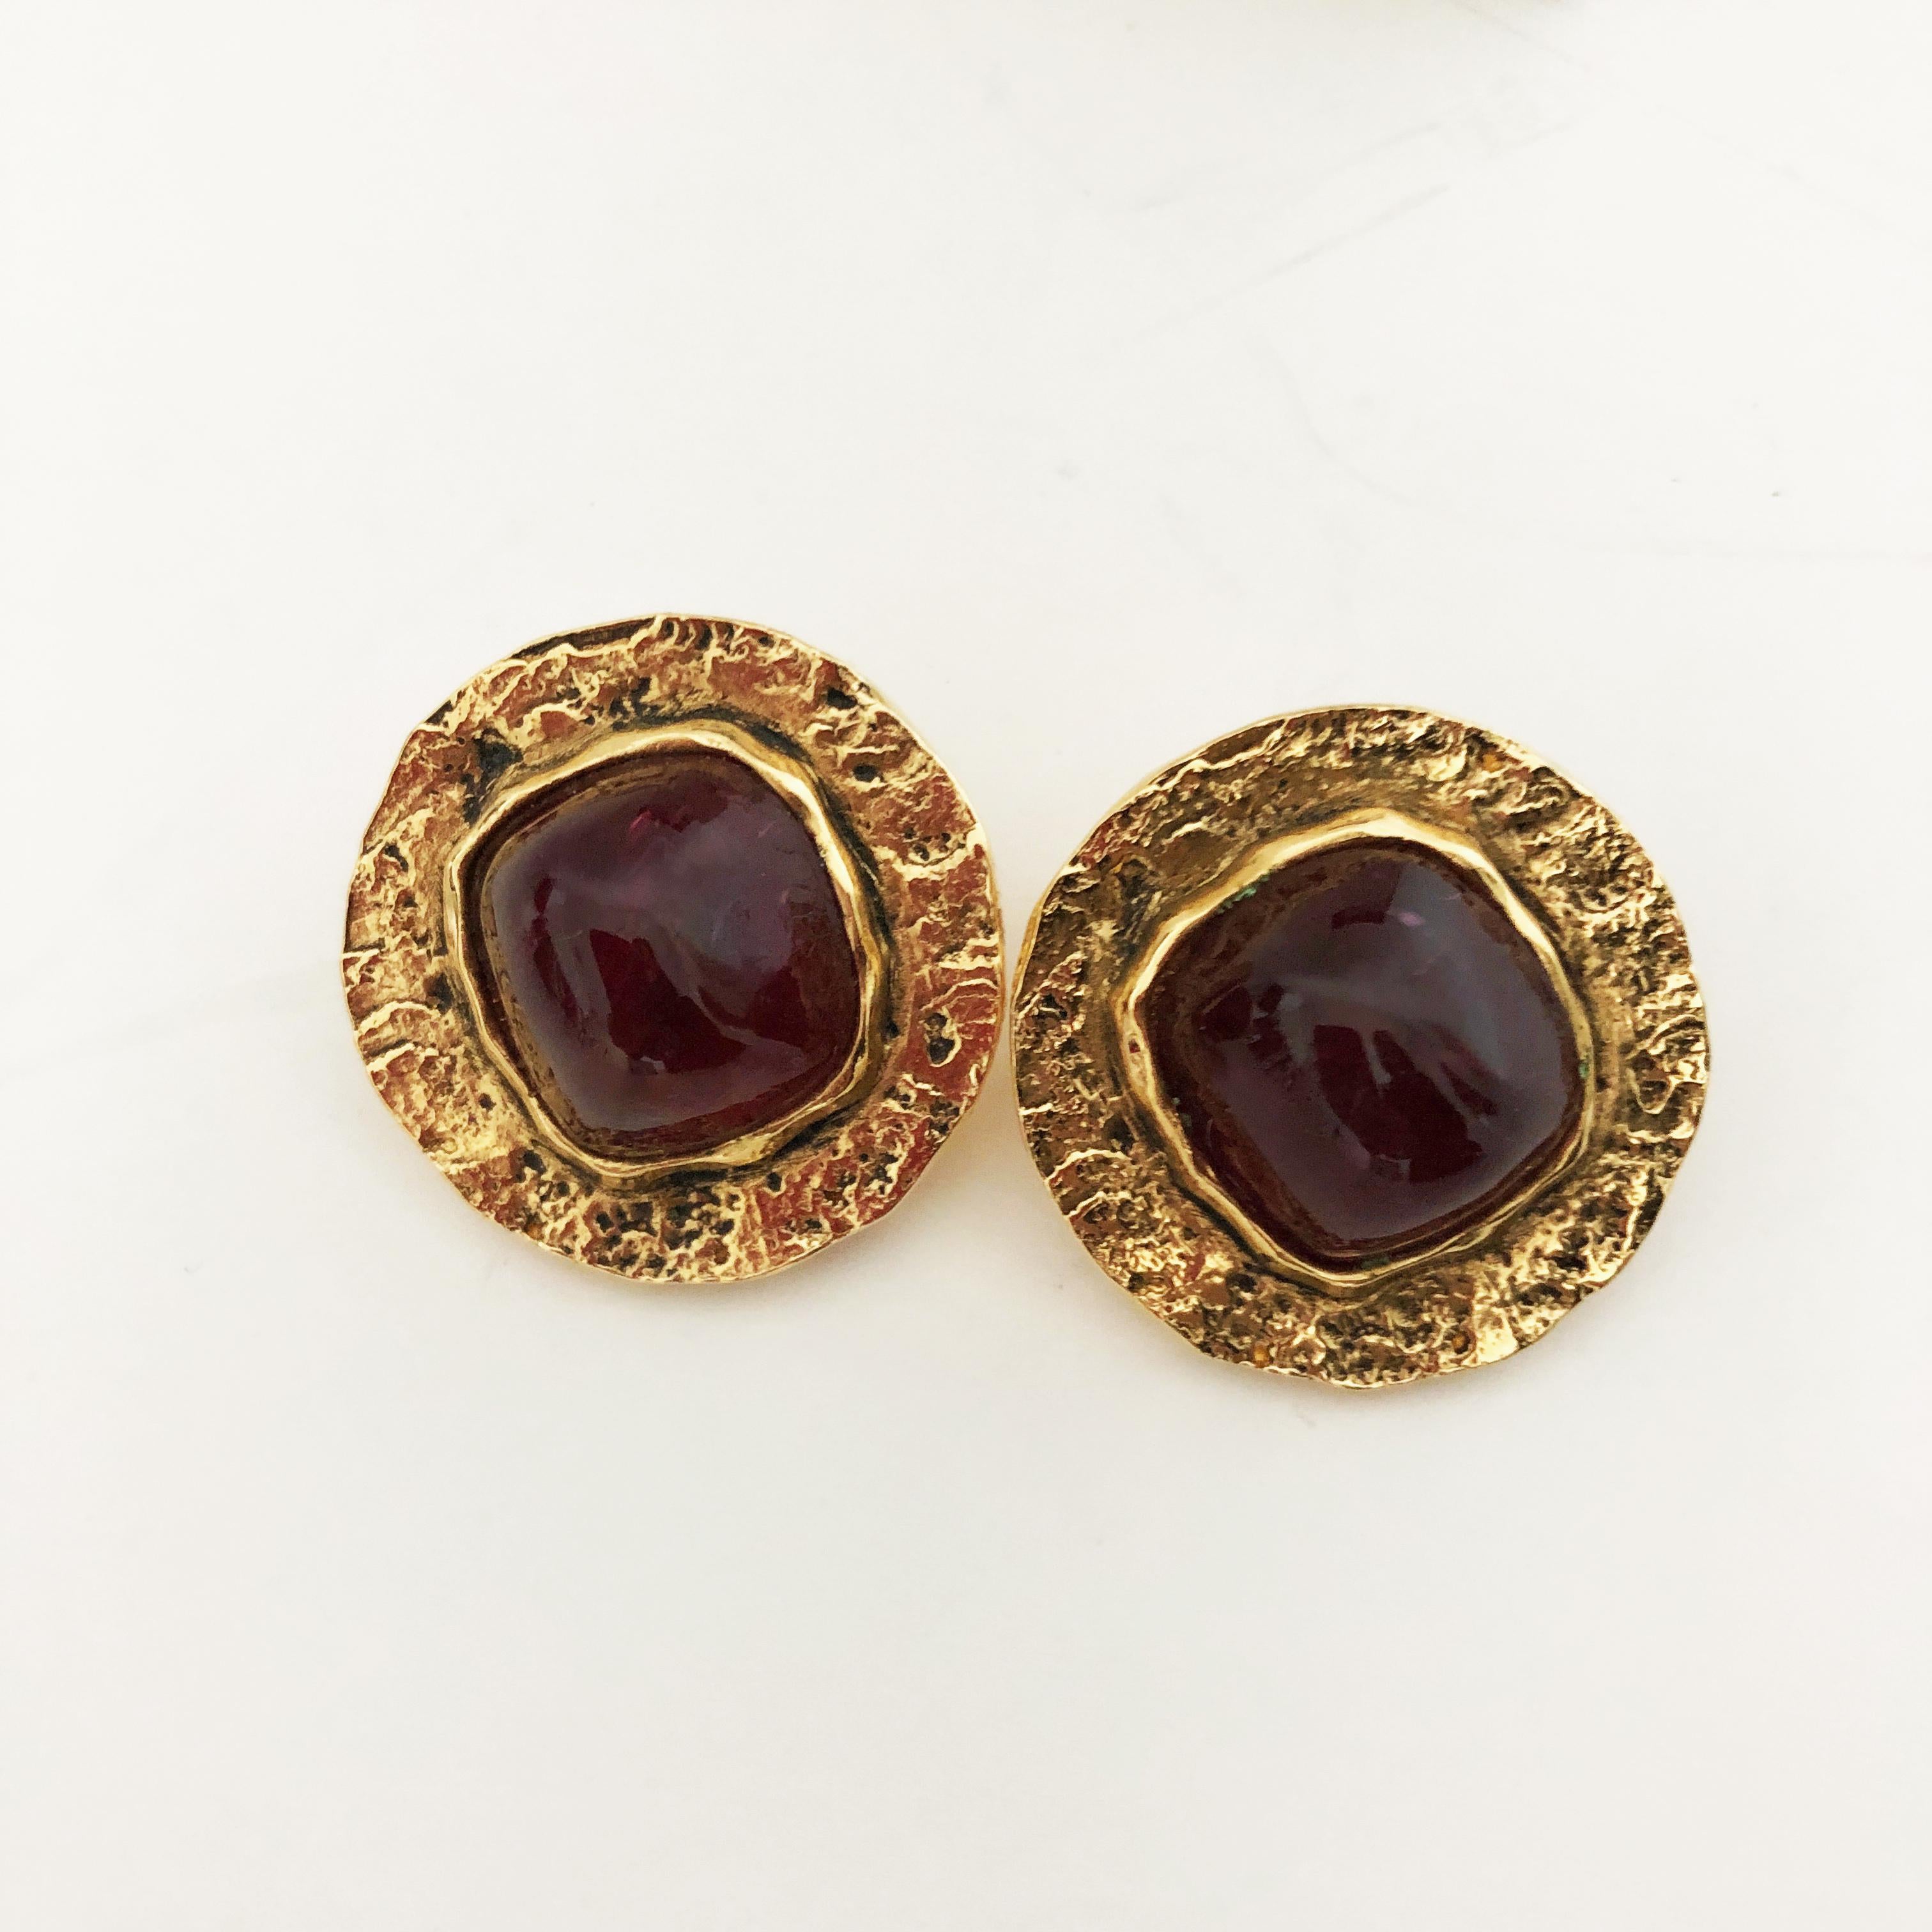 Women's Chanel Red Glass Earrings with Textured Gold Setting Goossens Vintage 70s 